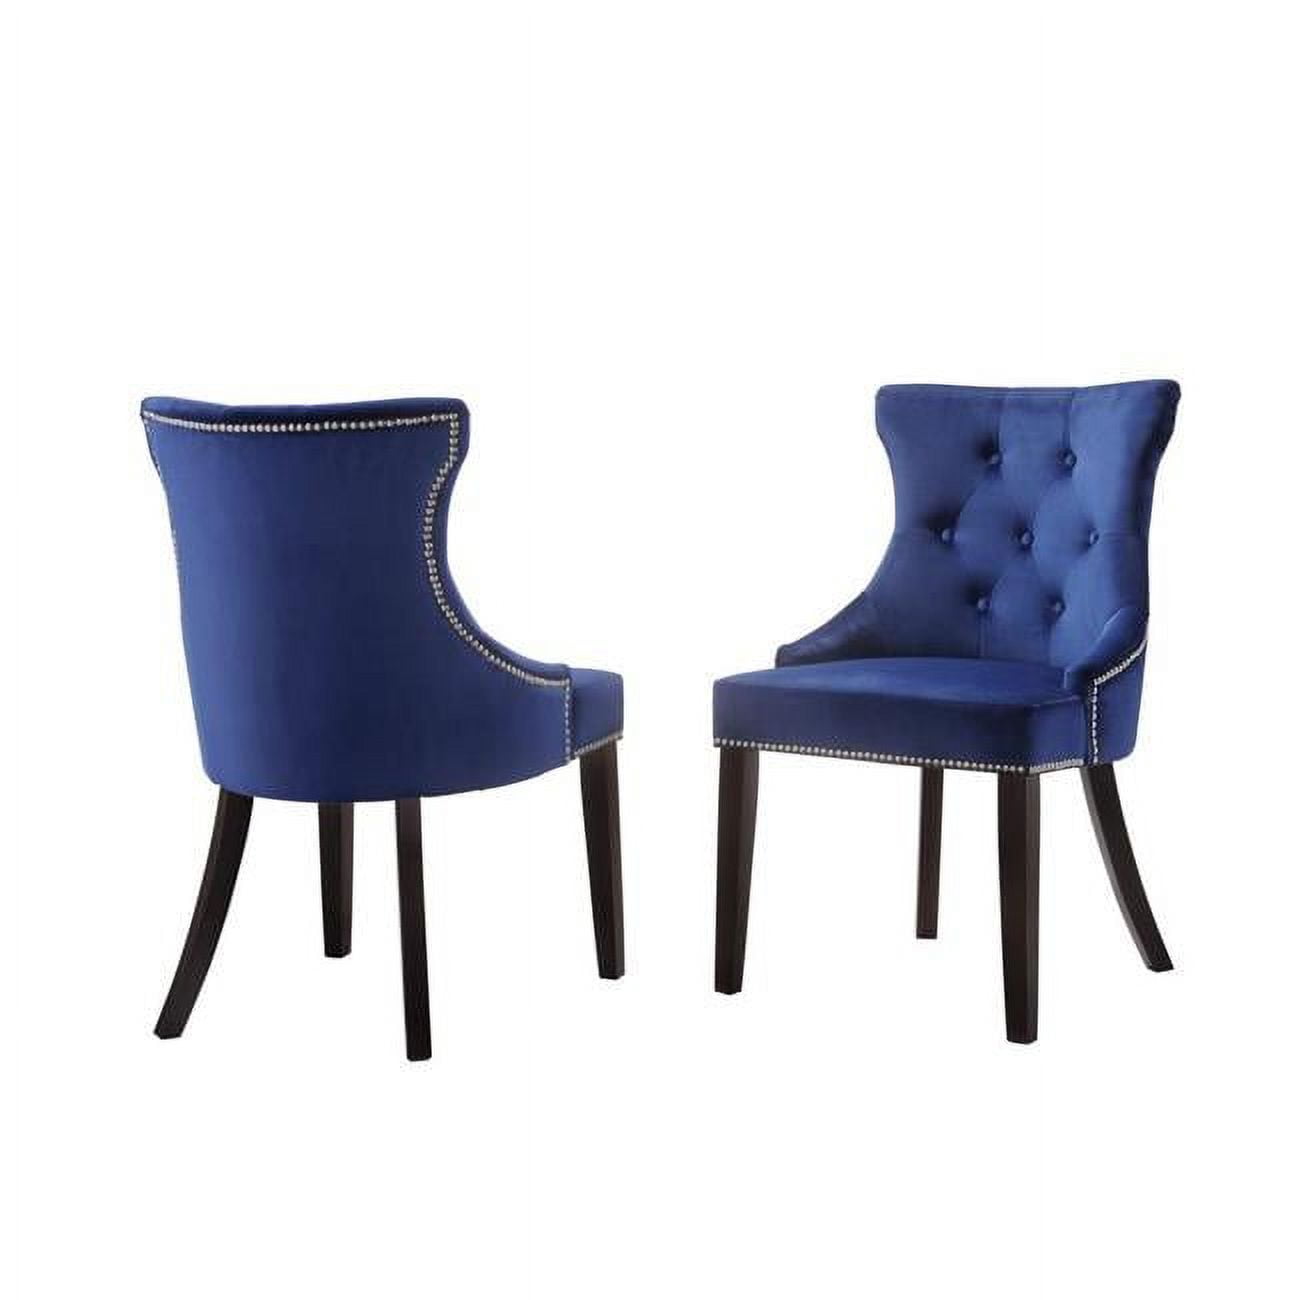 Picture of Carolina Cottage 2123-ESPBLU Julia Tufted Back Upholstered Nail Head Chair - Espresso & Navy - Set of 2 - 23.5 x 21 x 35 in.